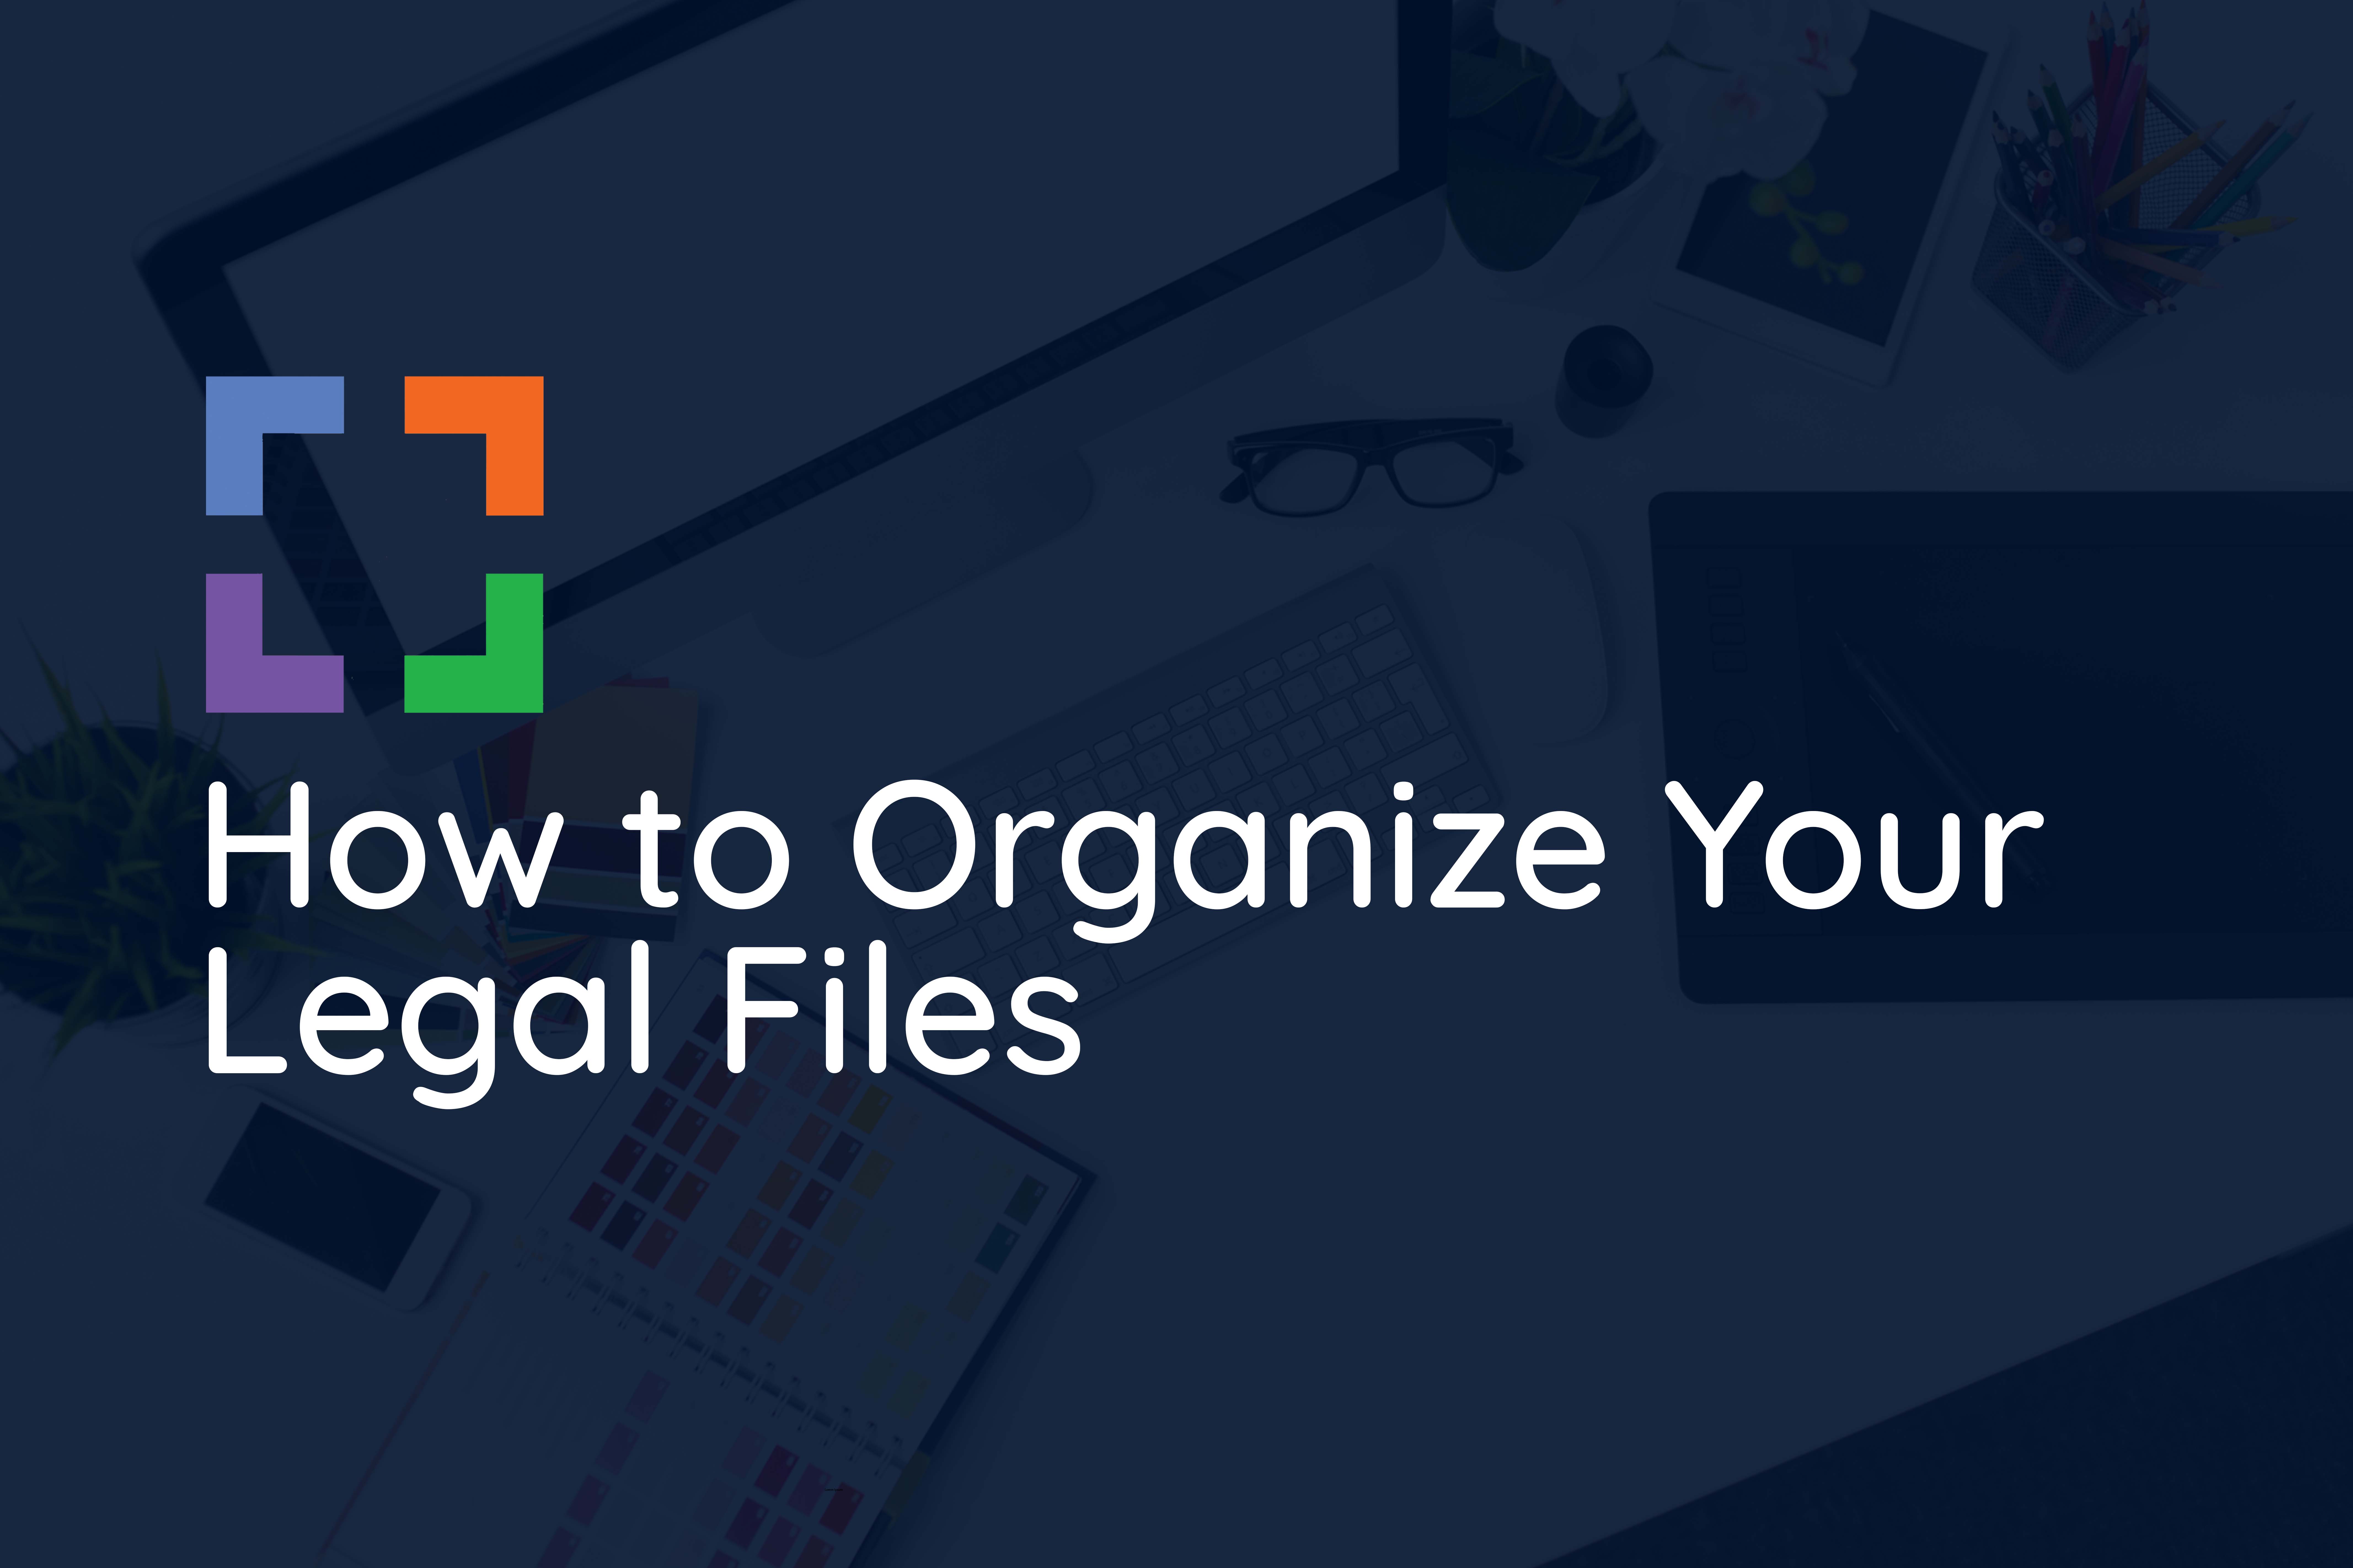 How to Organize Your Legal Files